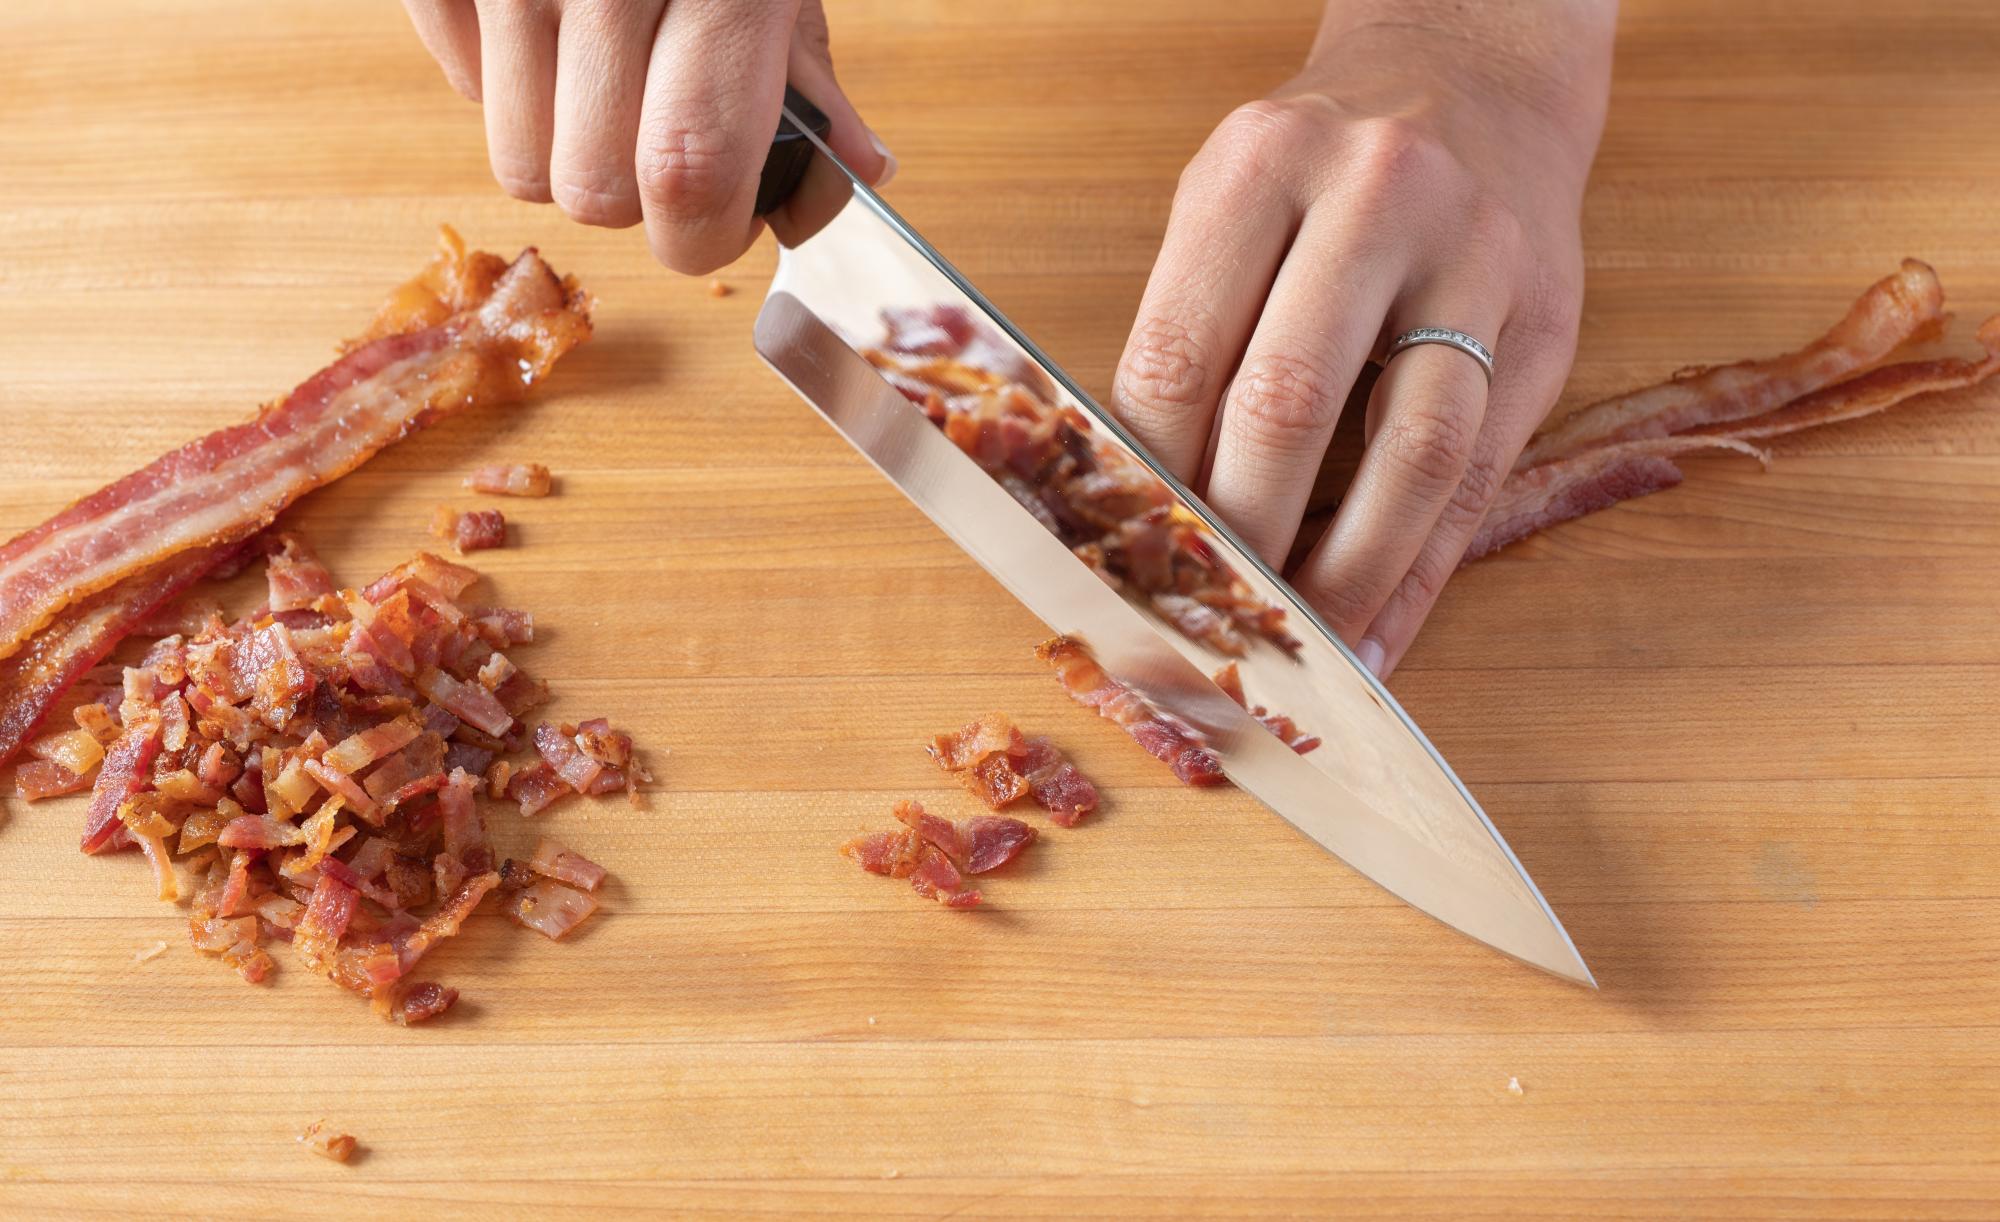 Chopping the bacon with a Petite Chef knife.